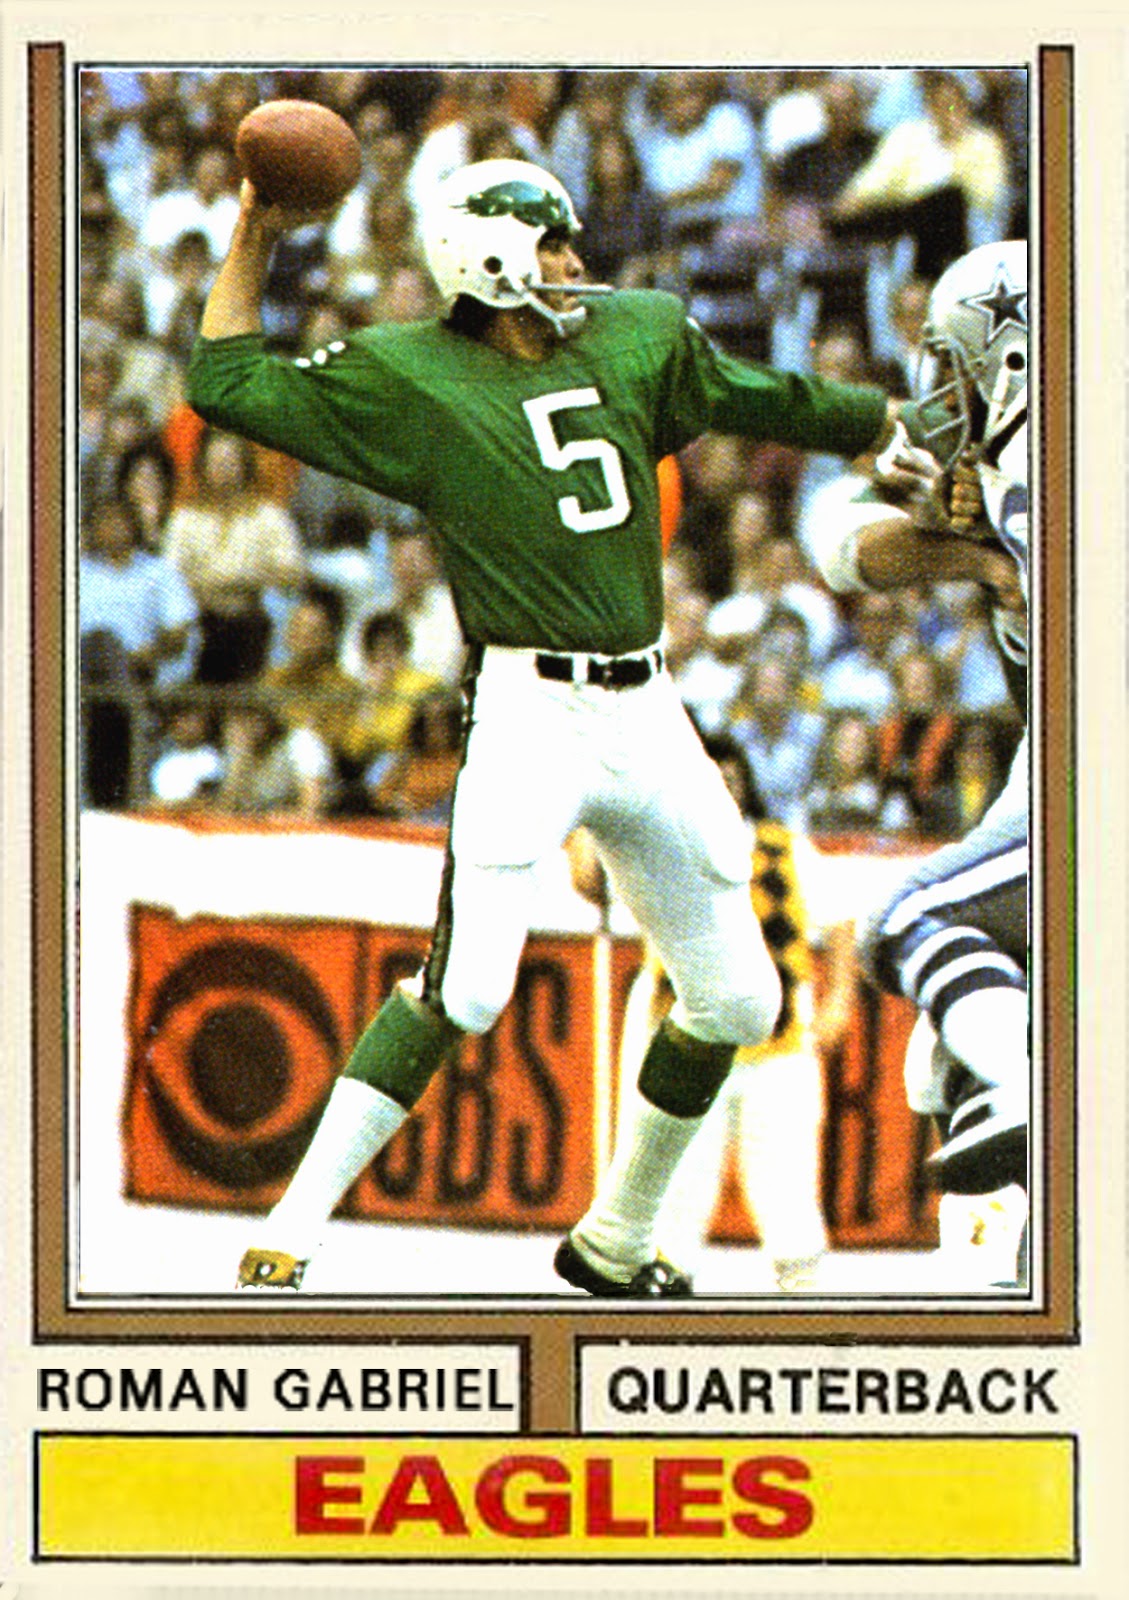 Roman Gabriel for Pro Football Hall of Fame